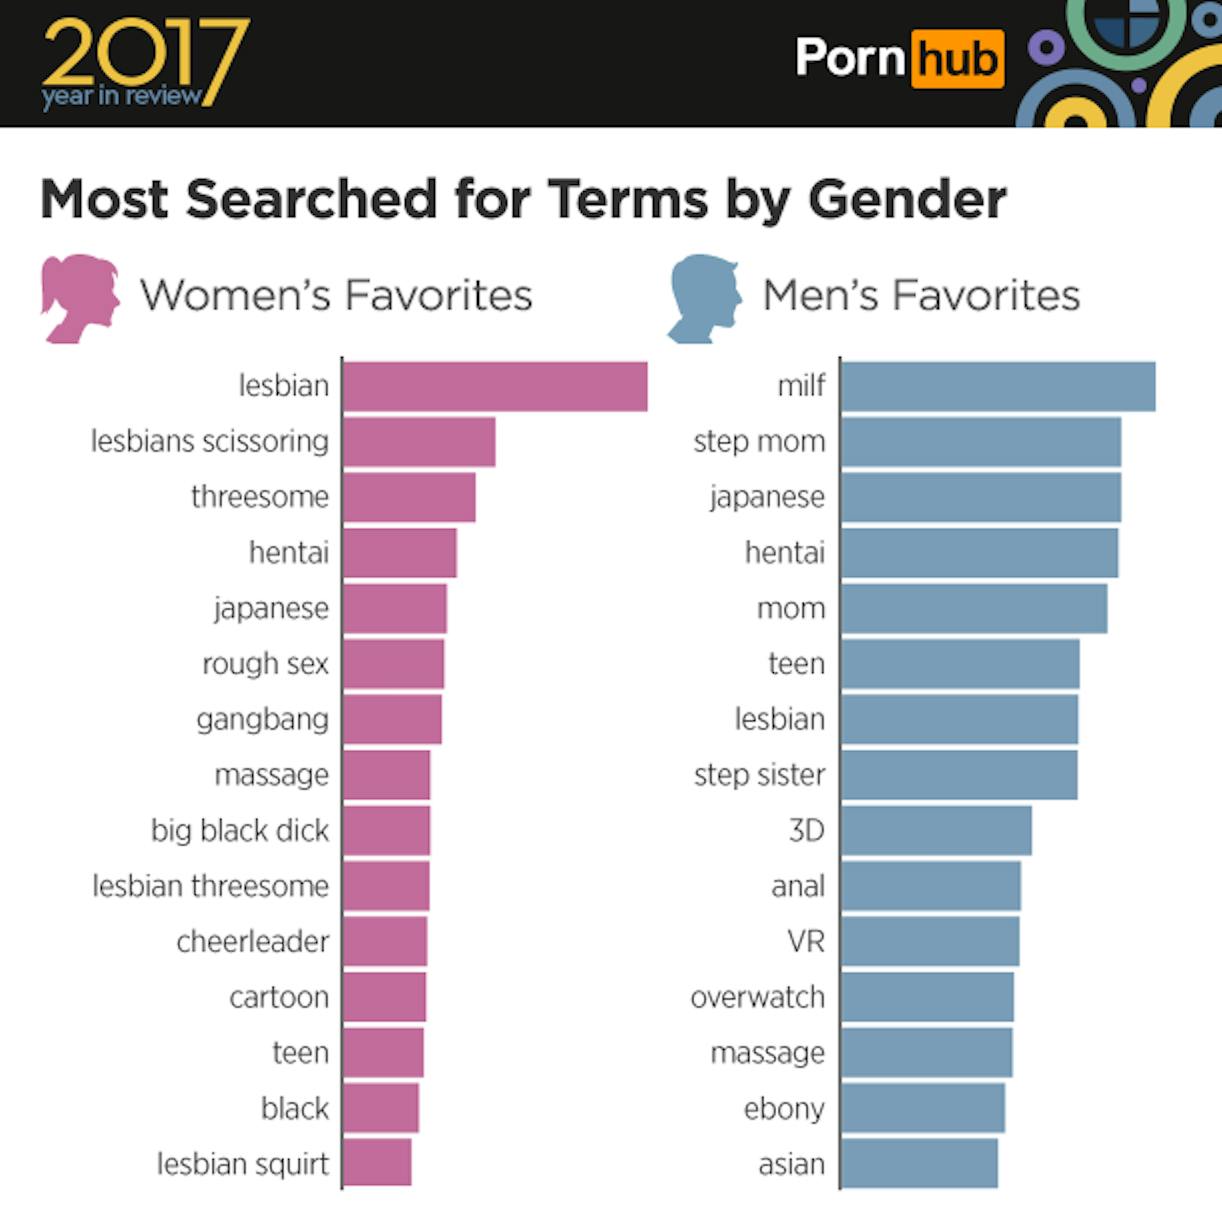 Huge Lesbian Squirt Hentai - Pornhub's Stats for 2017 Reveal How Much We Love Hentai and ...